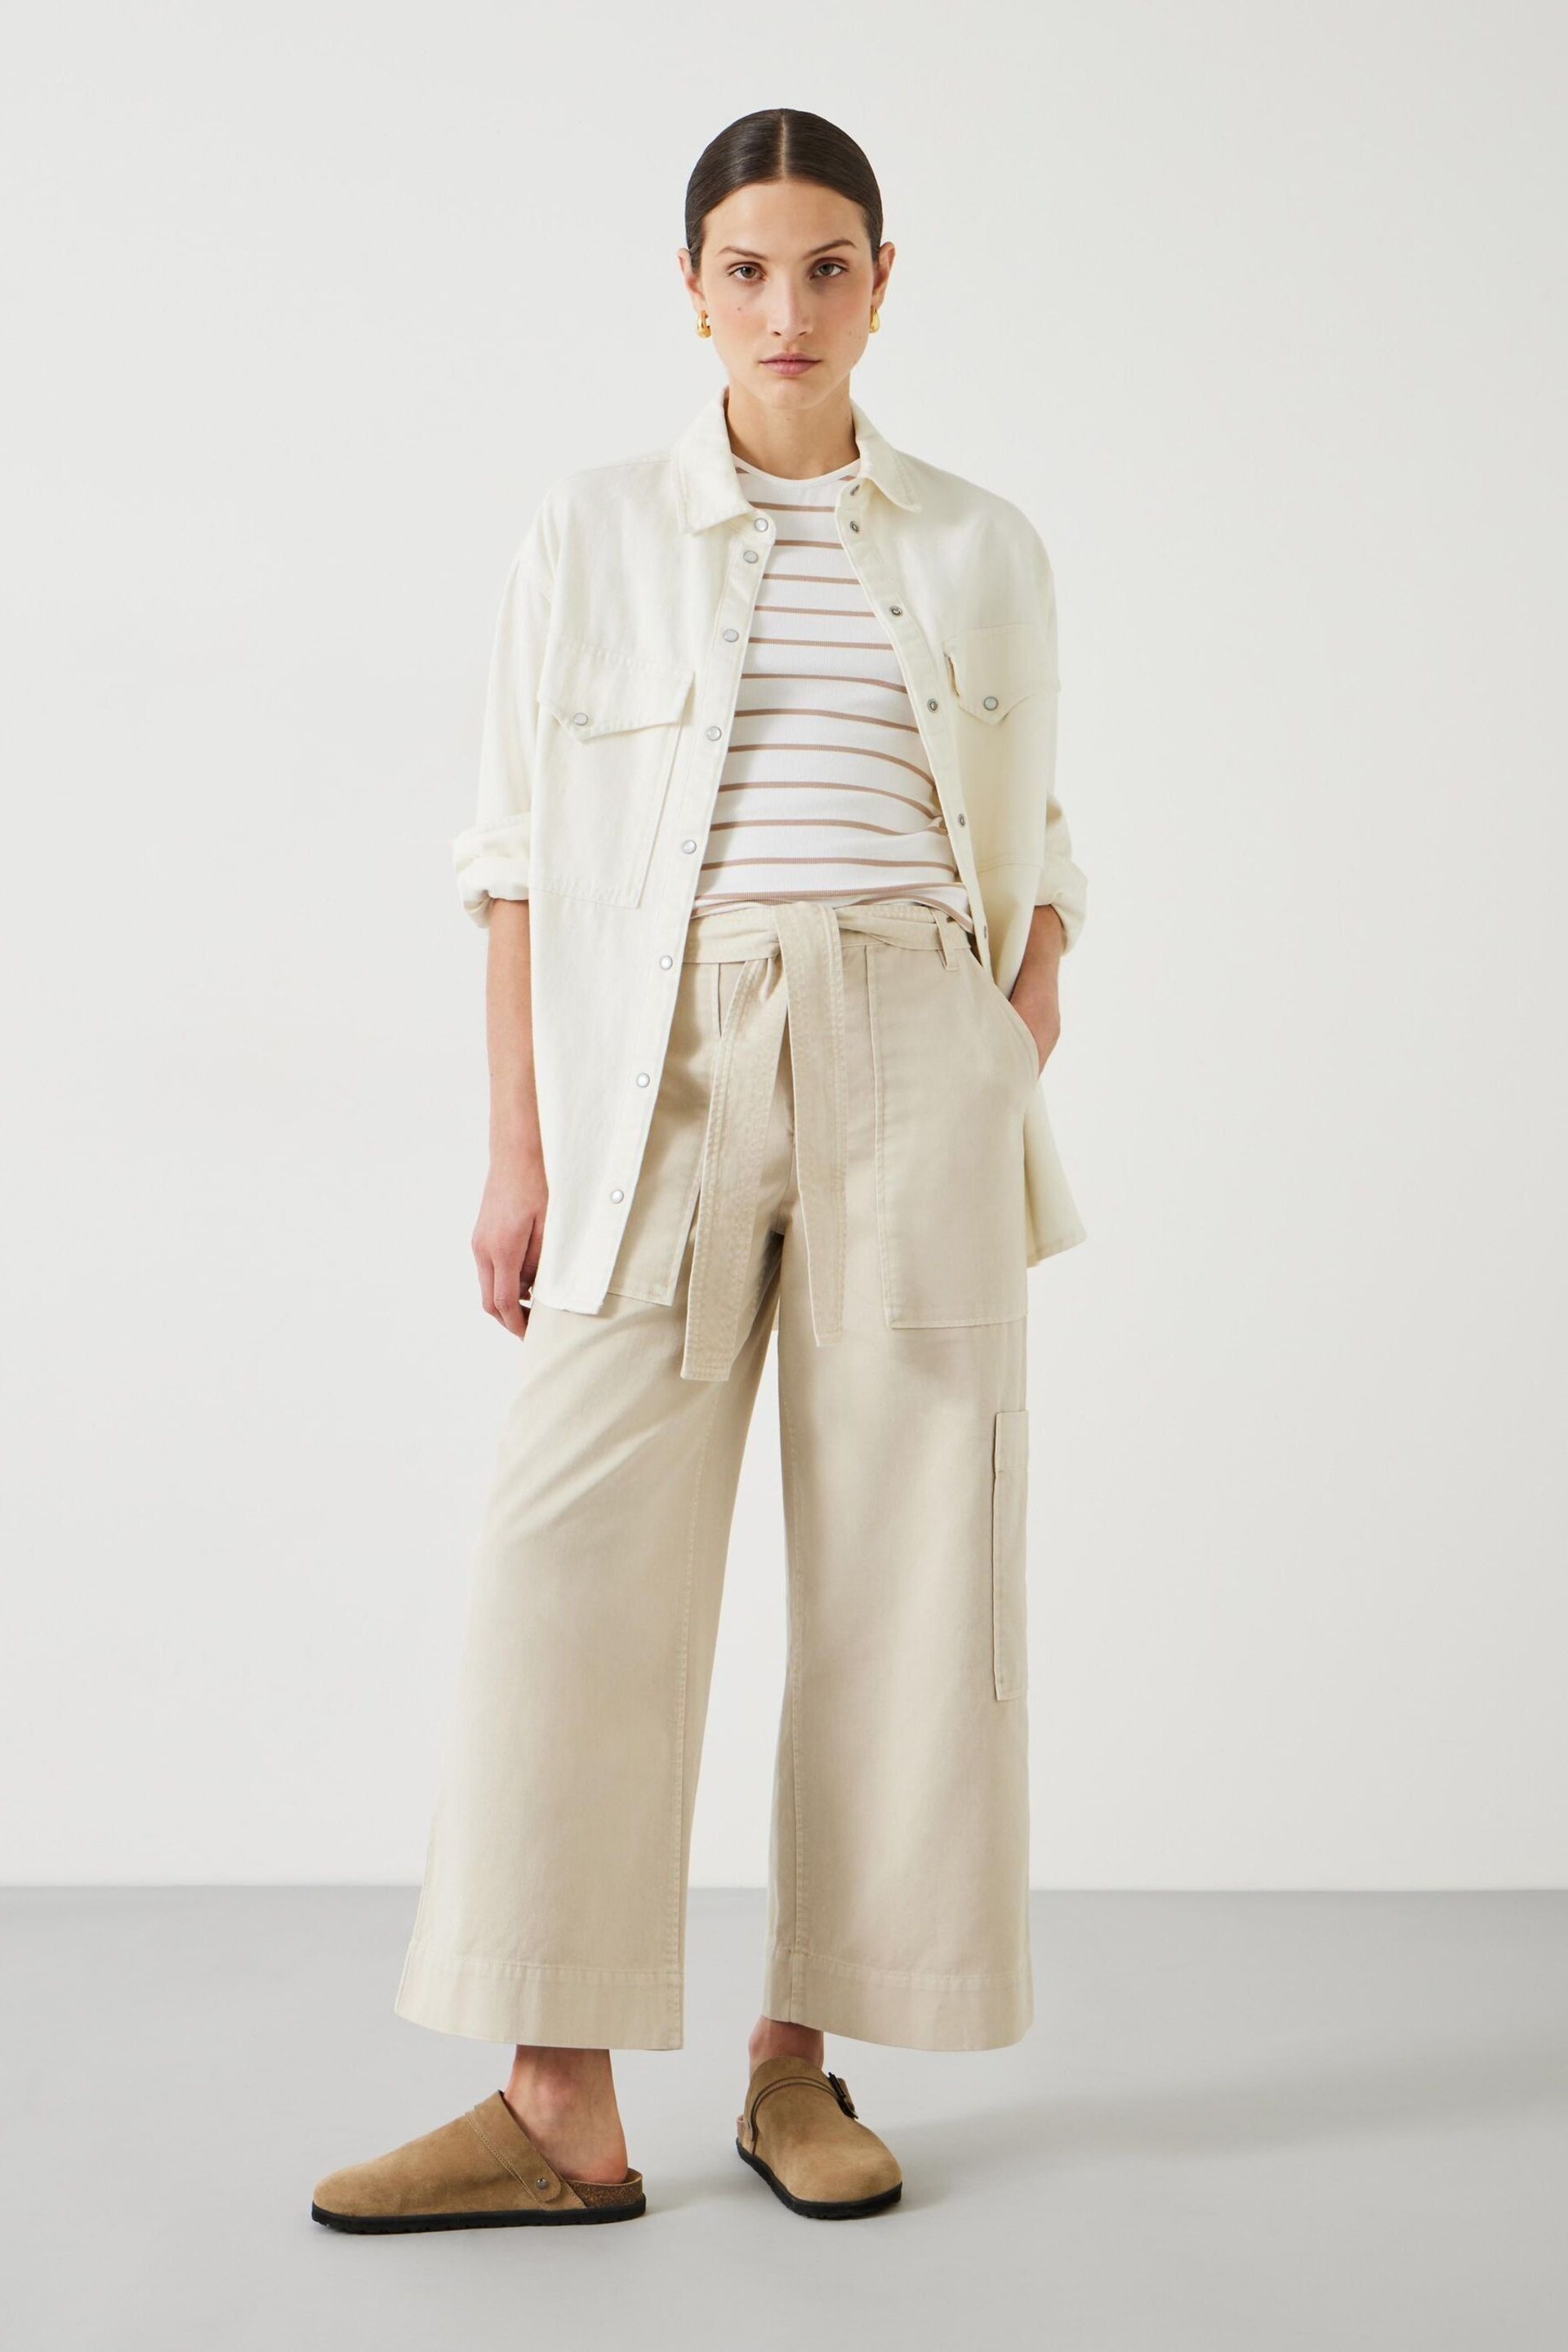 Hush Natural Annie Ankle Grazer Trousers - Image 1 of 5